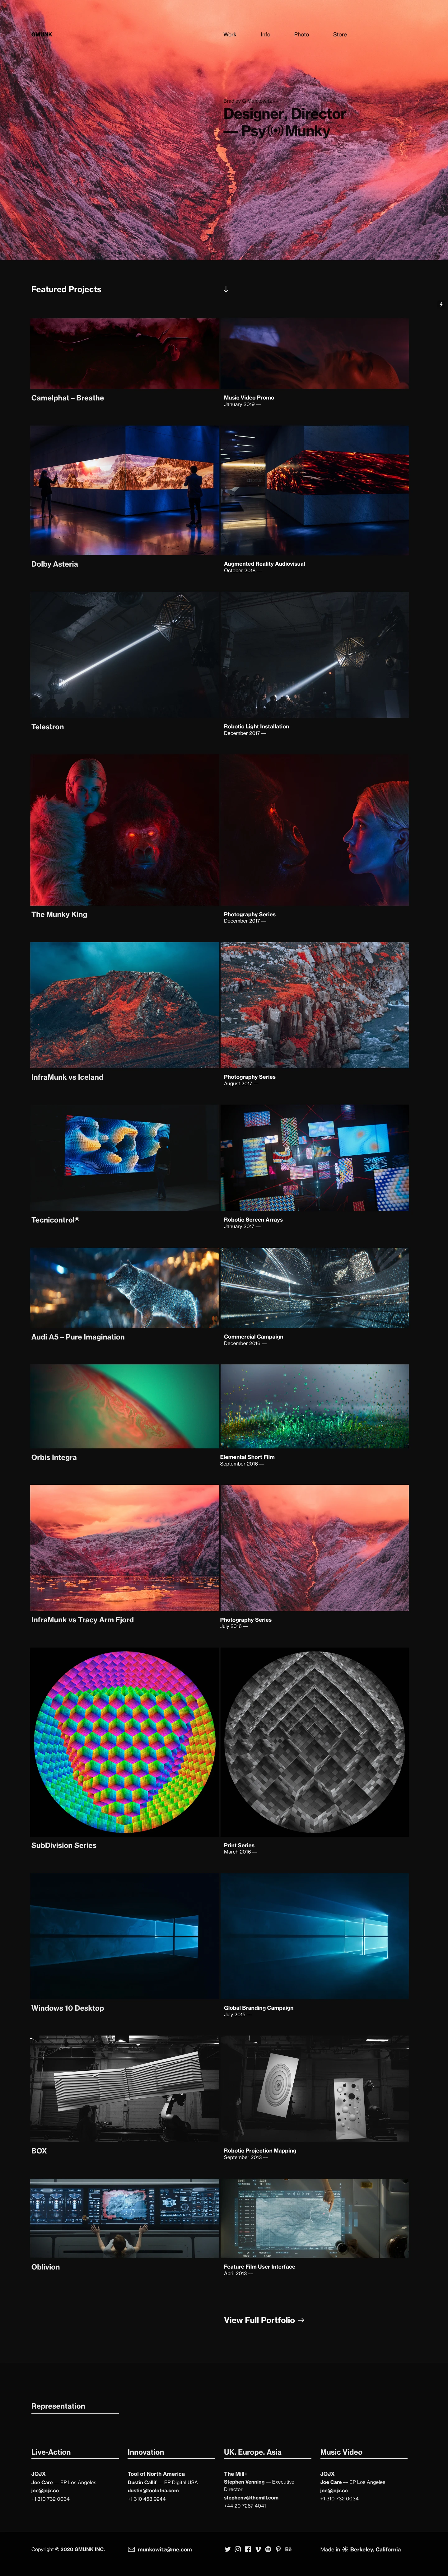 GMUNK Landing Page Example: GMUNK is a visionary whose creativity and innovation spans multiple platforms, and has established himself as one of the top visual and design directors in the world. Utilizing a fusion of science-fiction themes, psychedelic palettes, and practical in-camera effects, his signature style is enigmatic, atmospheric, and metaphysical – much like the Munky himself.